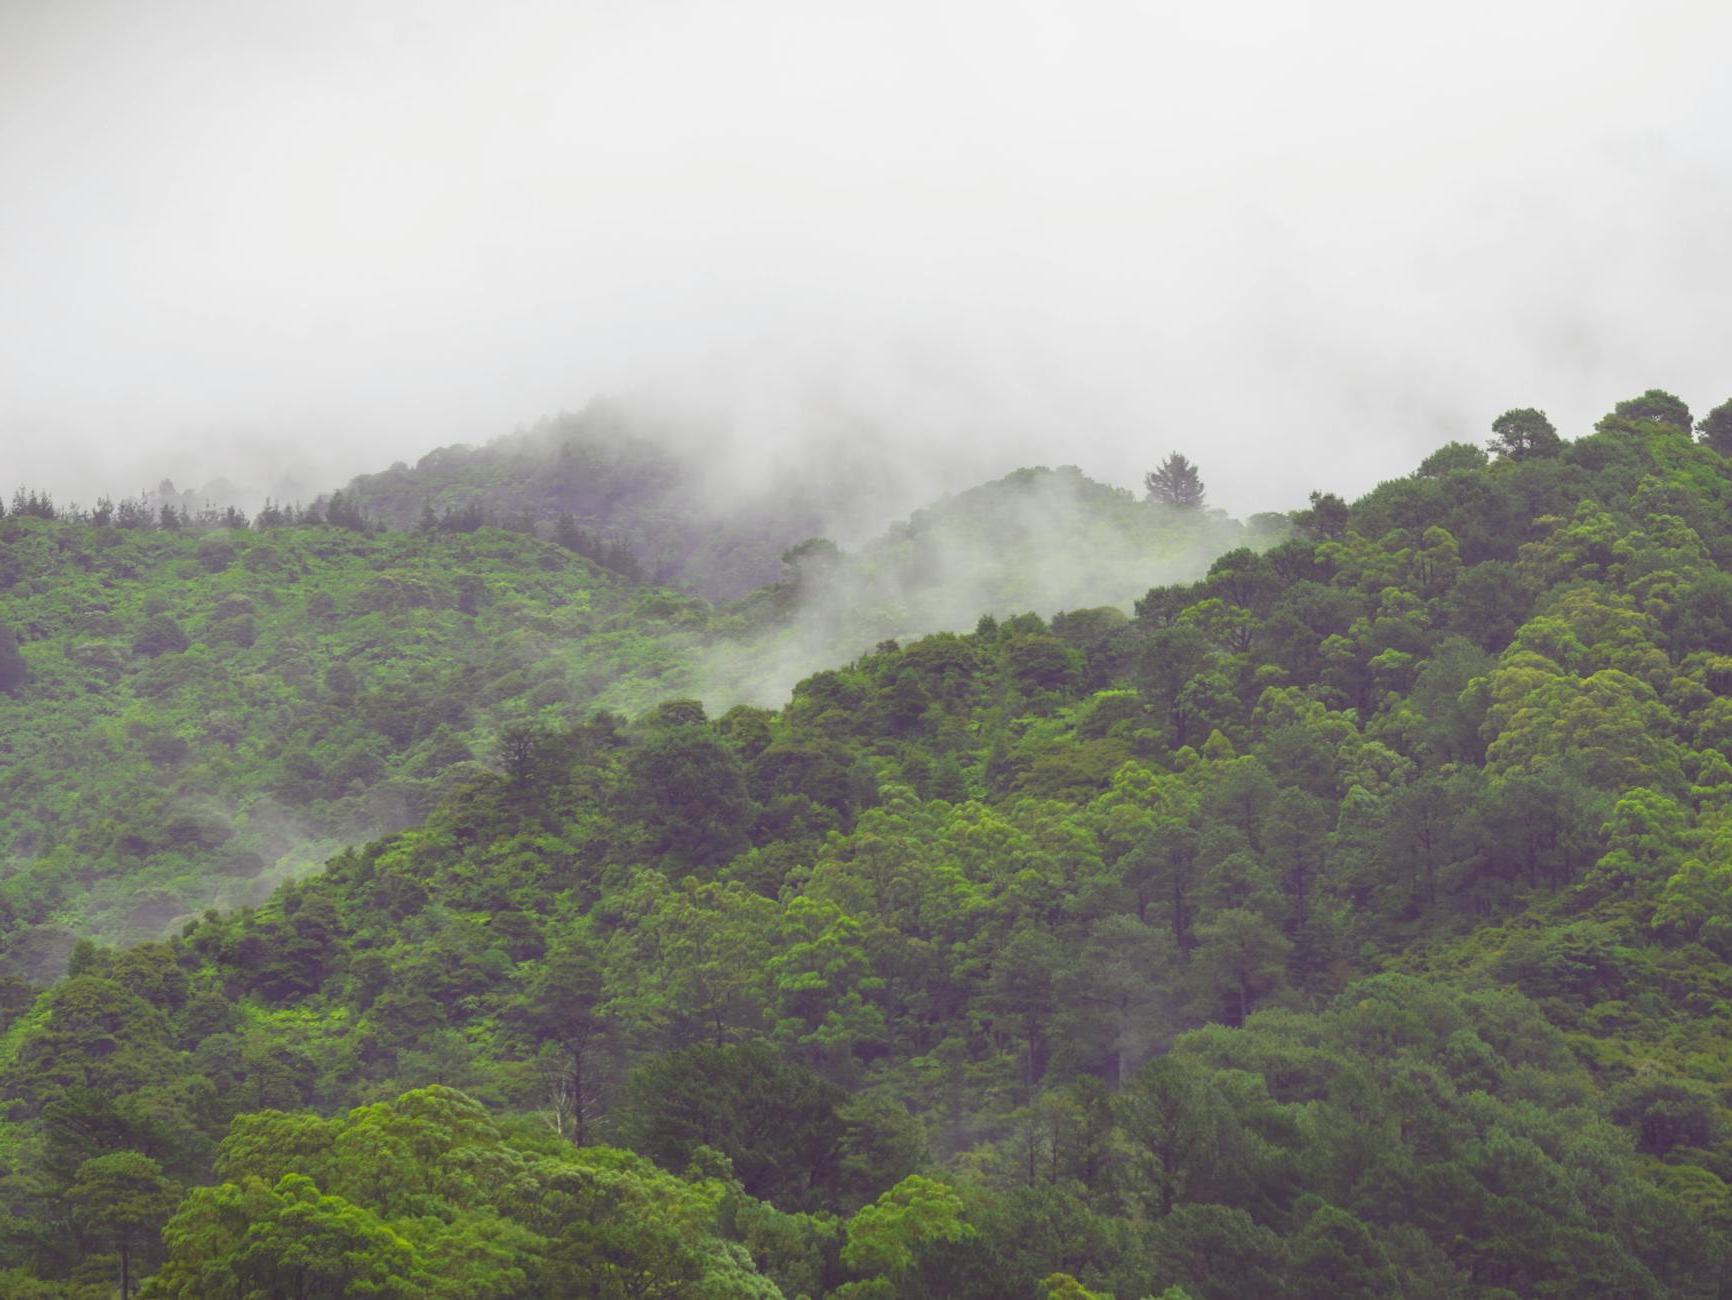 A large green mountain with trees and fog